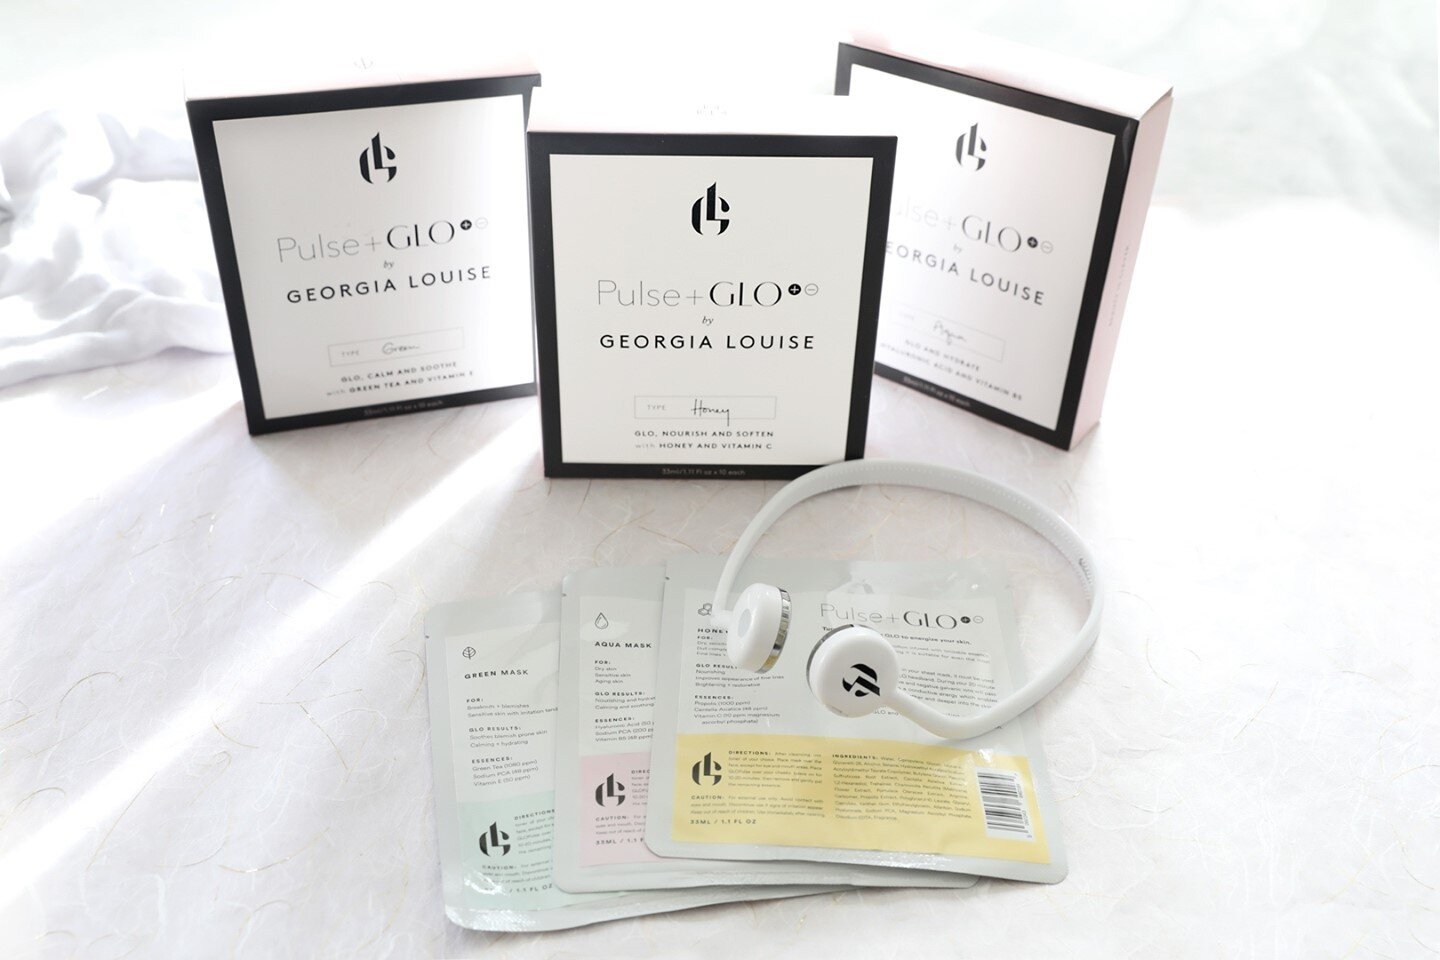 The Pulse+GLO Ion Enhancer works in conjunction with our specially formulated sheet masks filled with plumping and hydrating ingredients based on your skin type. Galvanic currents pulse anti-aging, blemish-control or calming essences from the sheet m